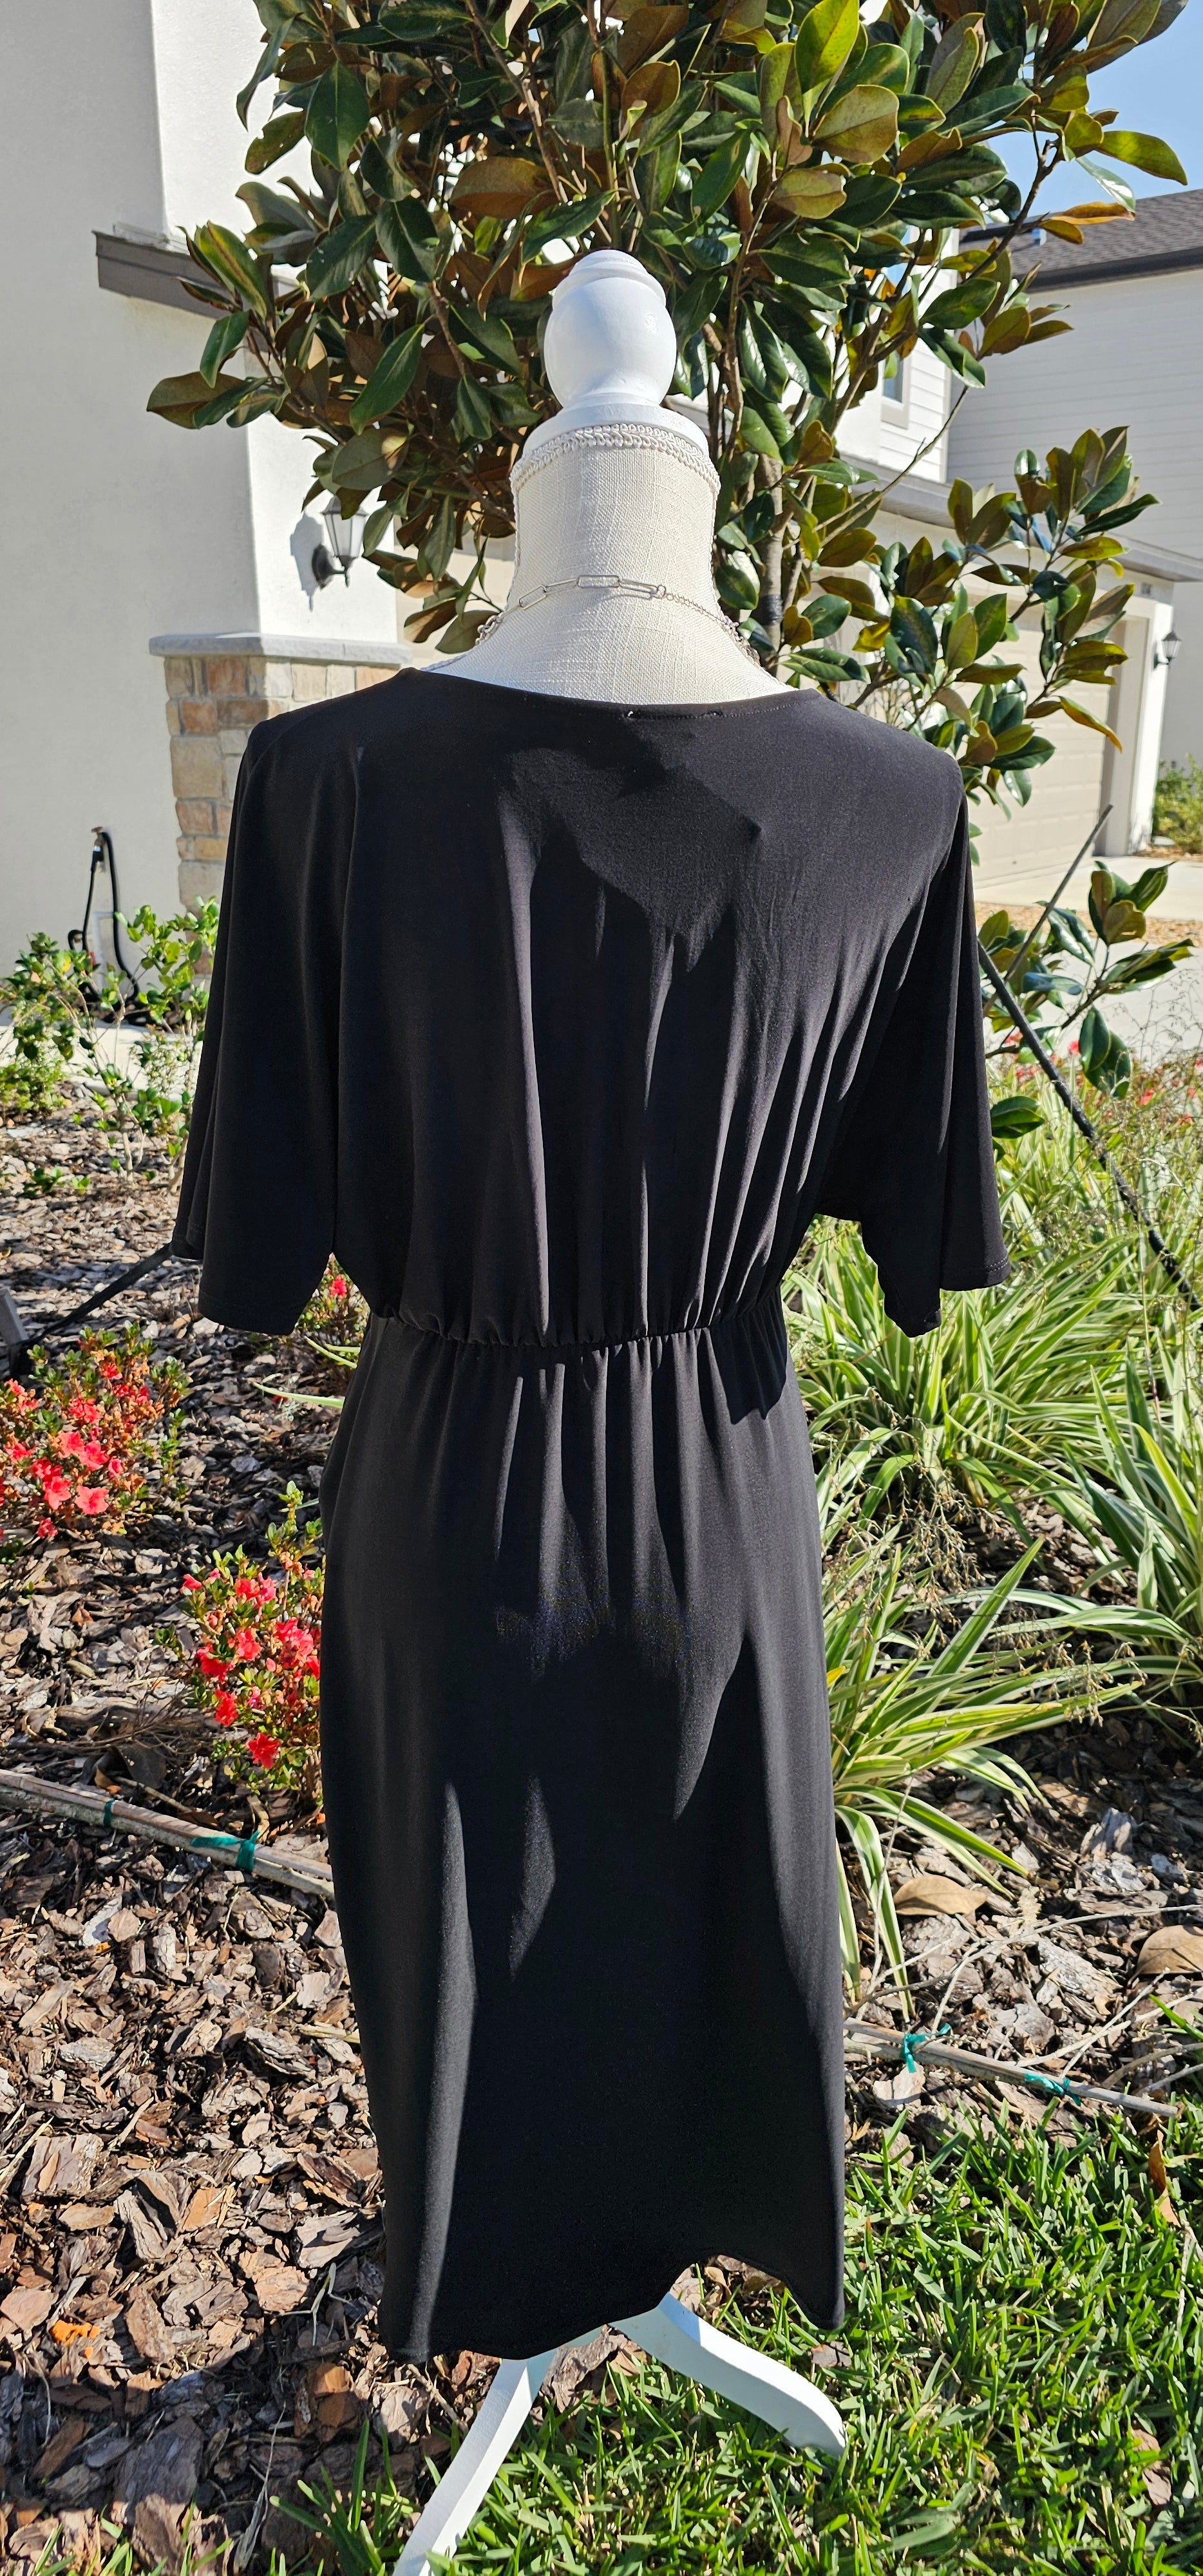 Style your look with this midi flutter sleeve dress. It features a surplice neckline and asymmetrical detail, making it a versatile style that's perfect for work or weekend wear. Sizes small through 3x-large.